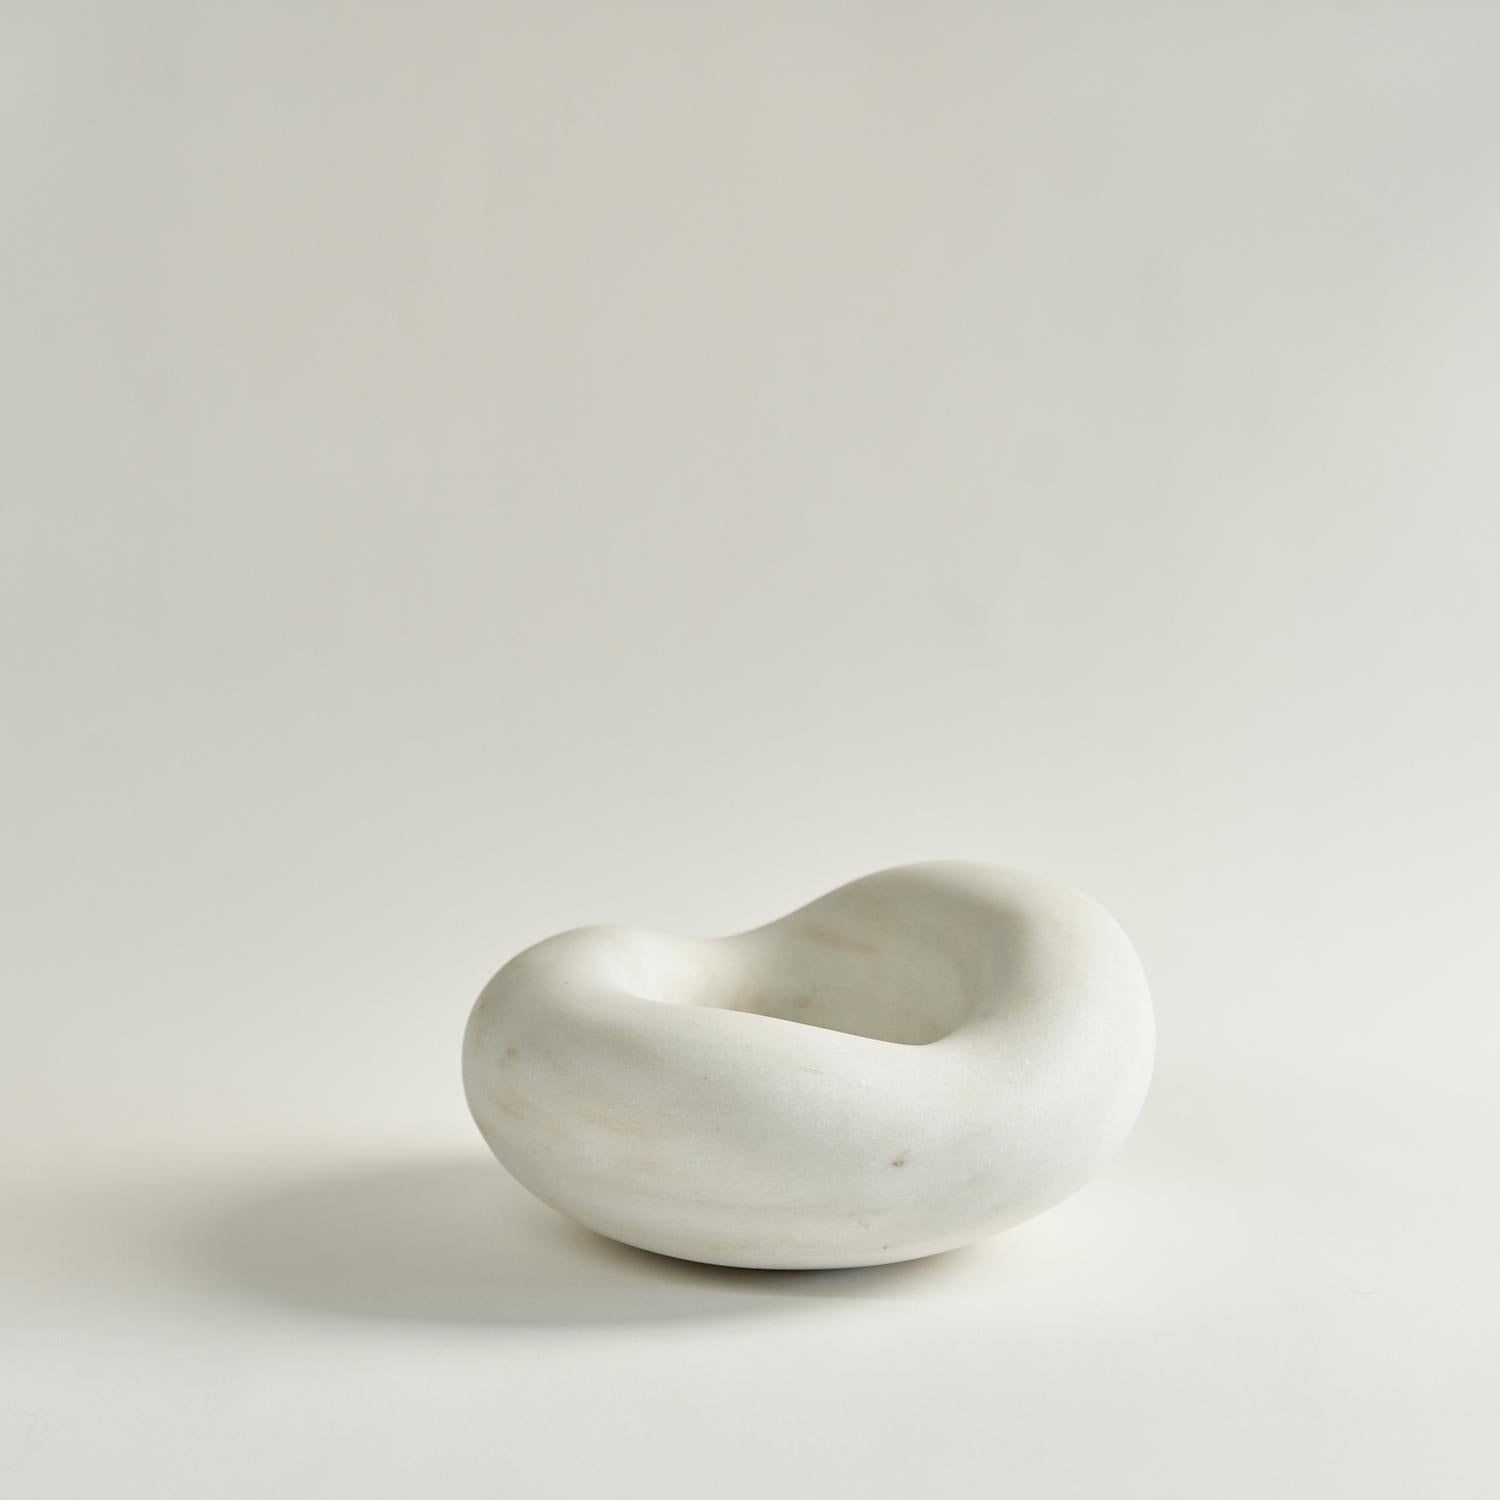 Unda Form sculpture by Dust and Form
Dimensions: D 27 x W 25 x H 12 cm
Materials: vermont imperial Danby marble

In Latin, the word “unda” is used to describe water, specifically ripples, waves or a body of flowing water. Water’s ever changing